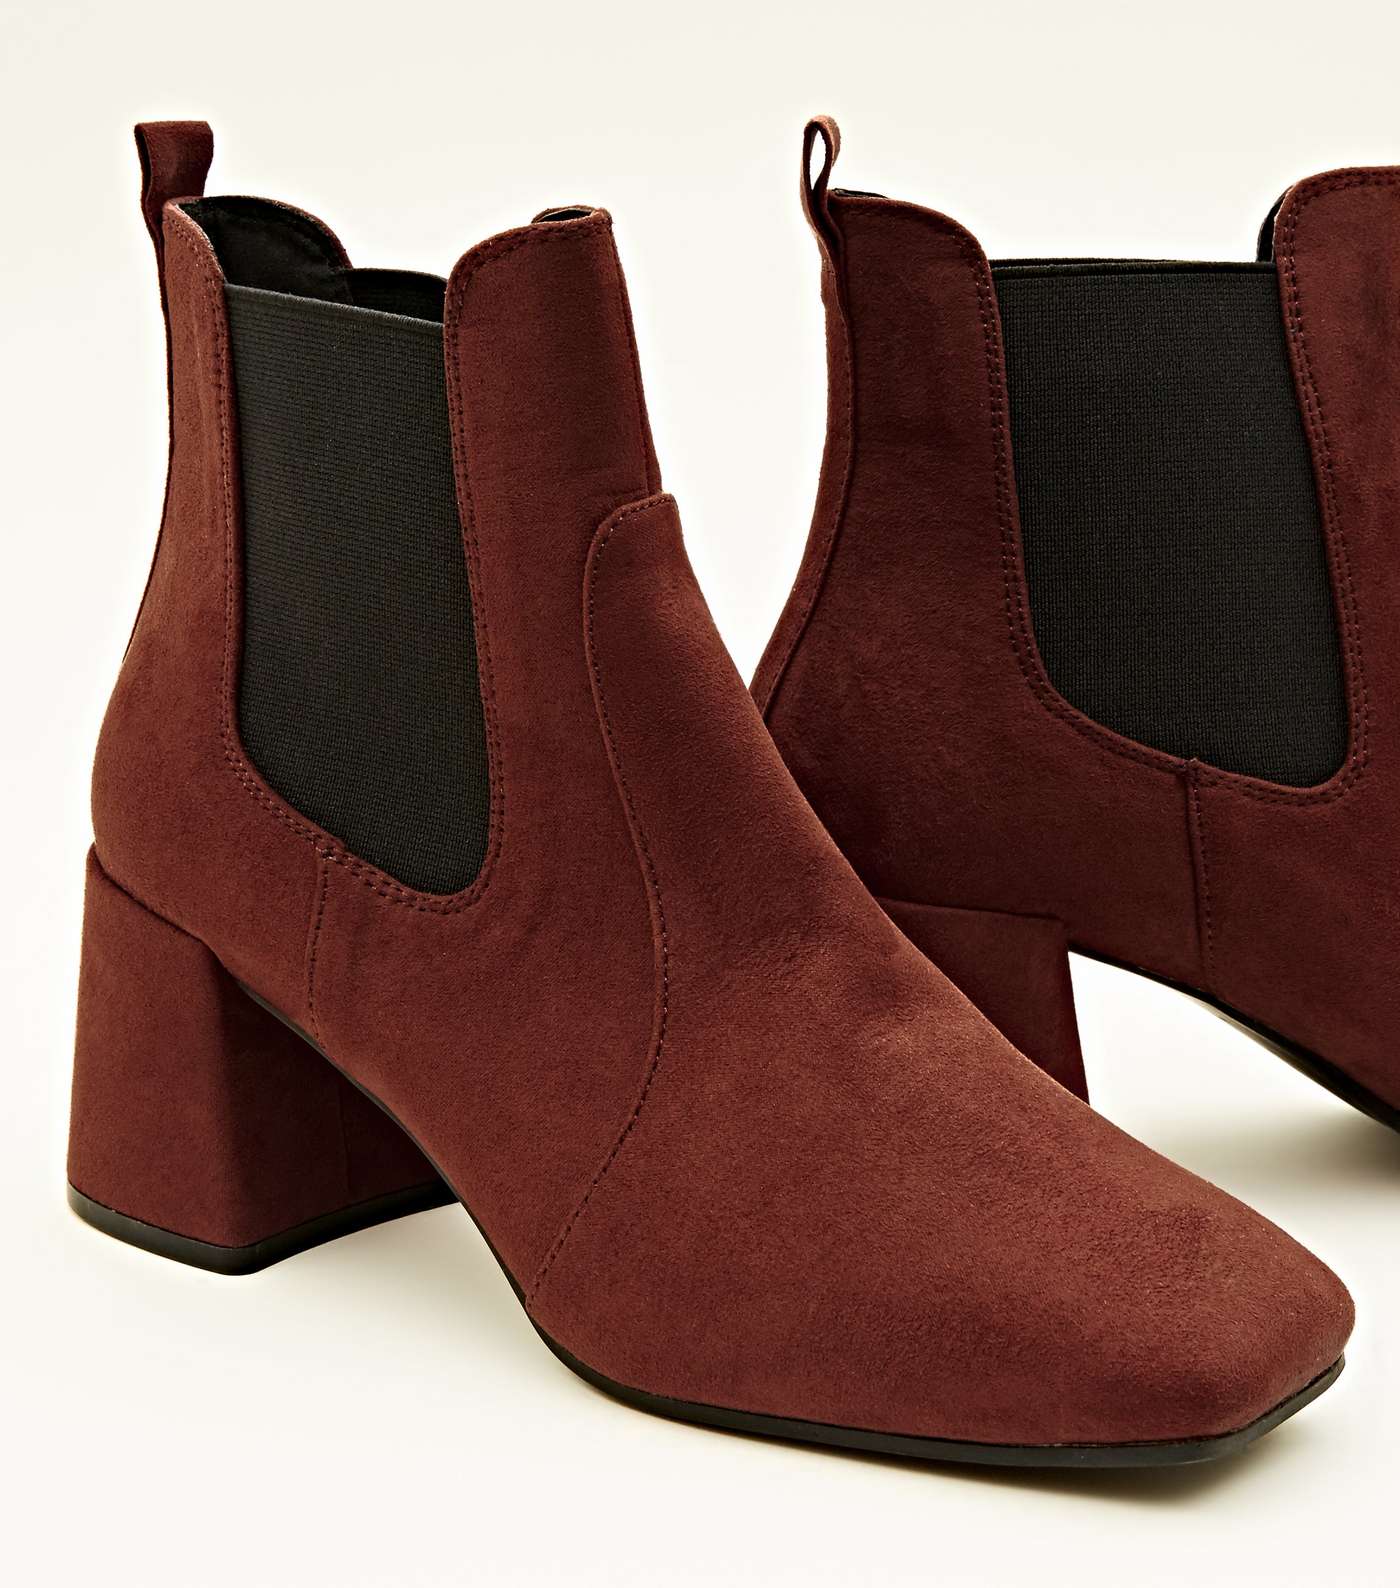 Rust Suedette Square Toe Heeled Chelsea Boots Image 4